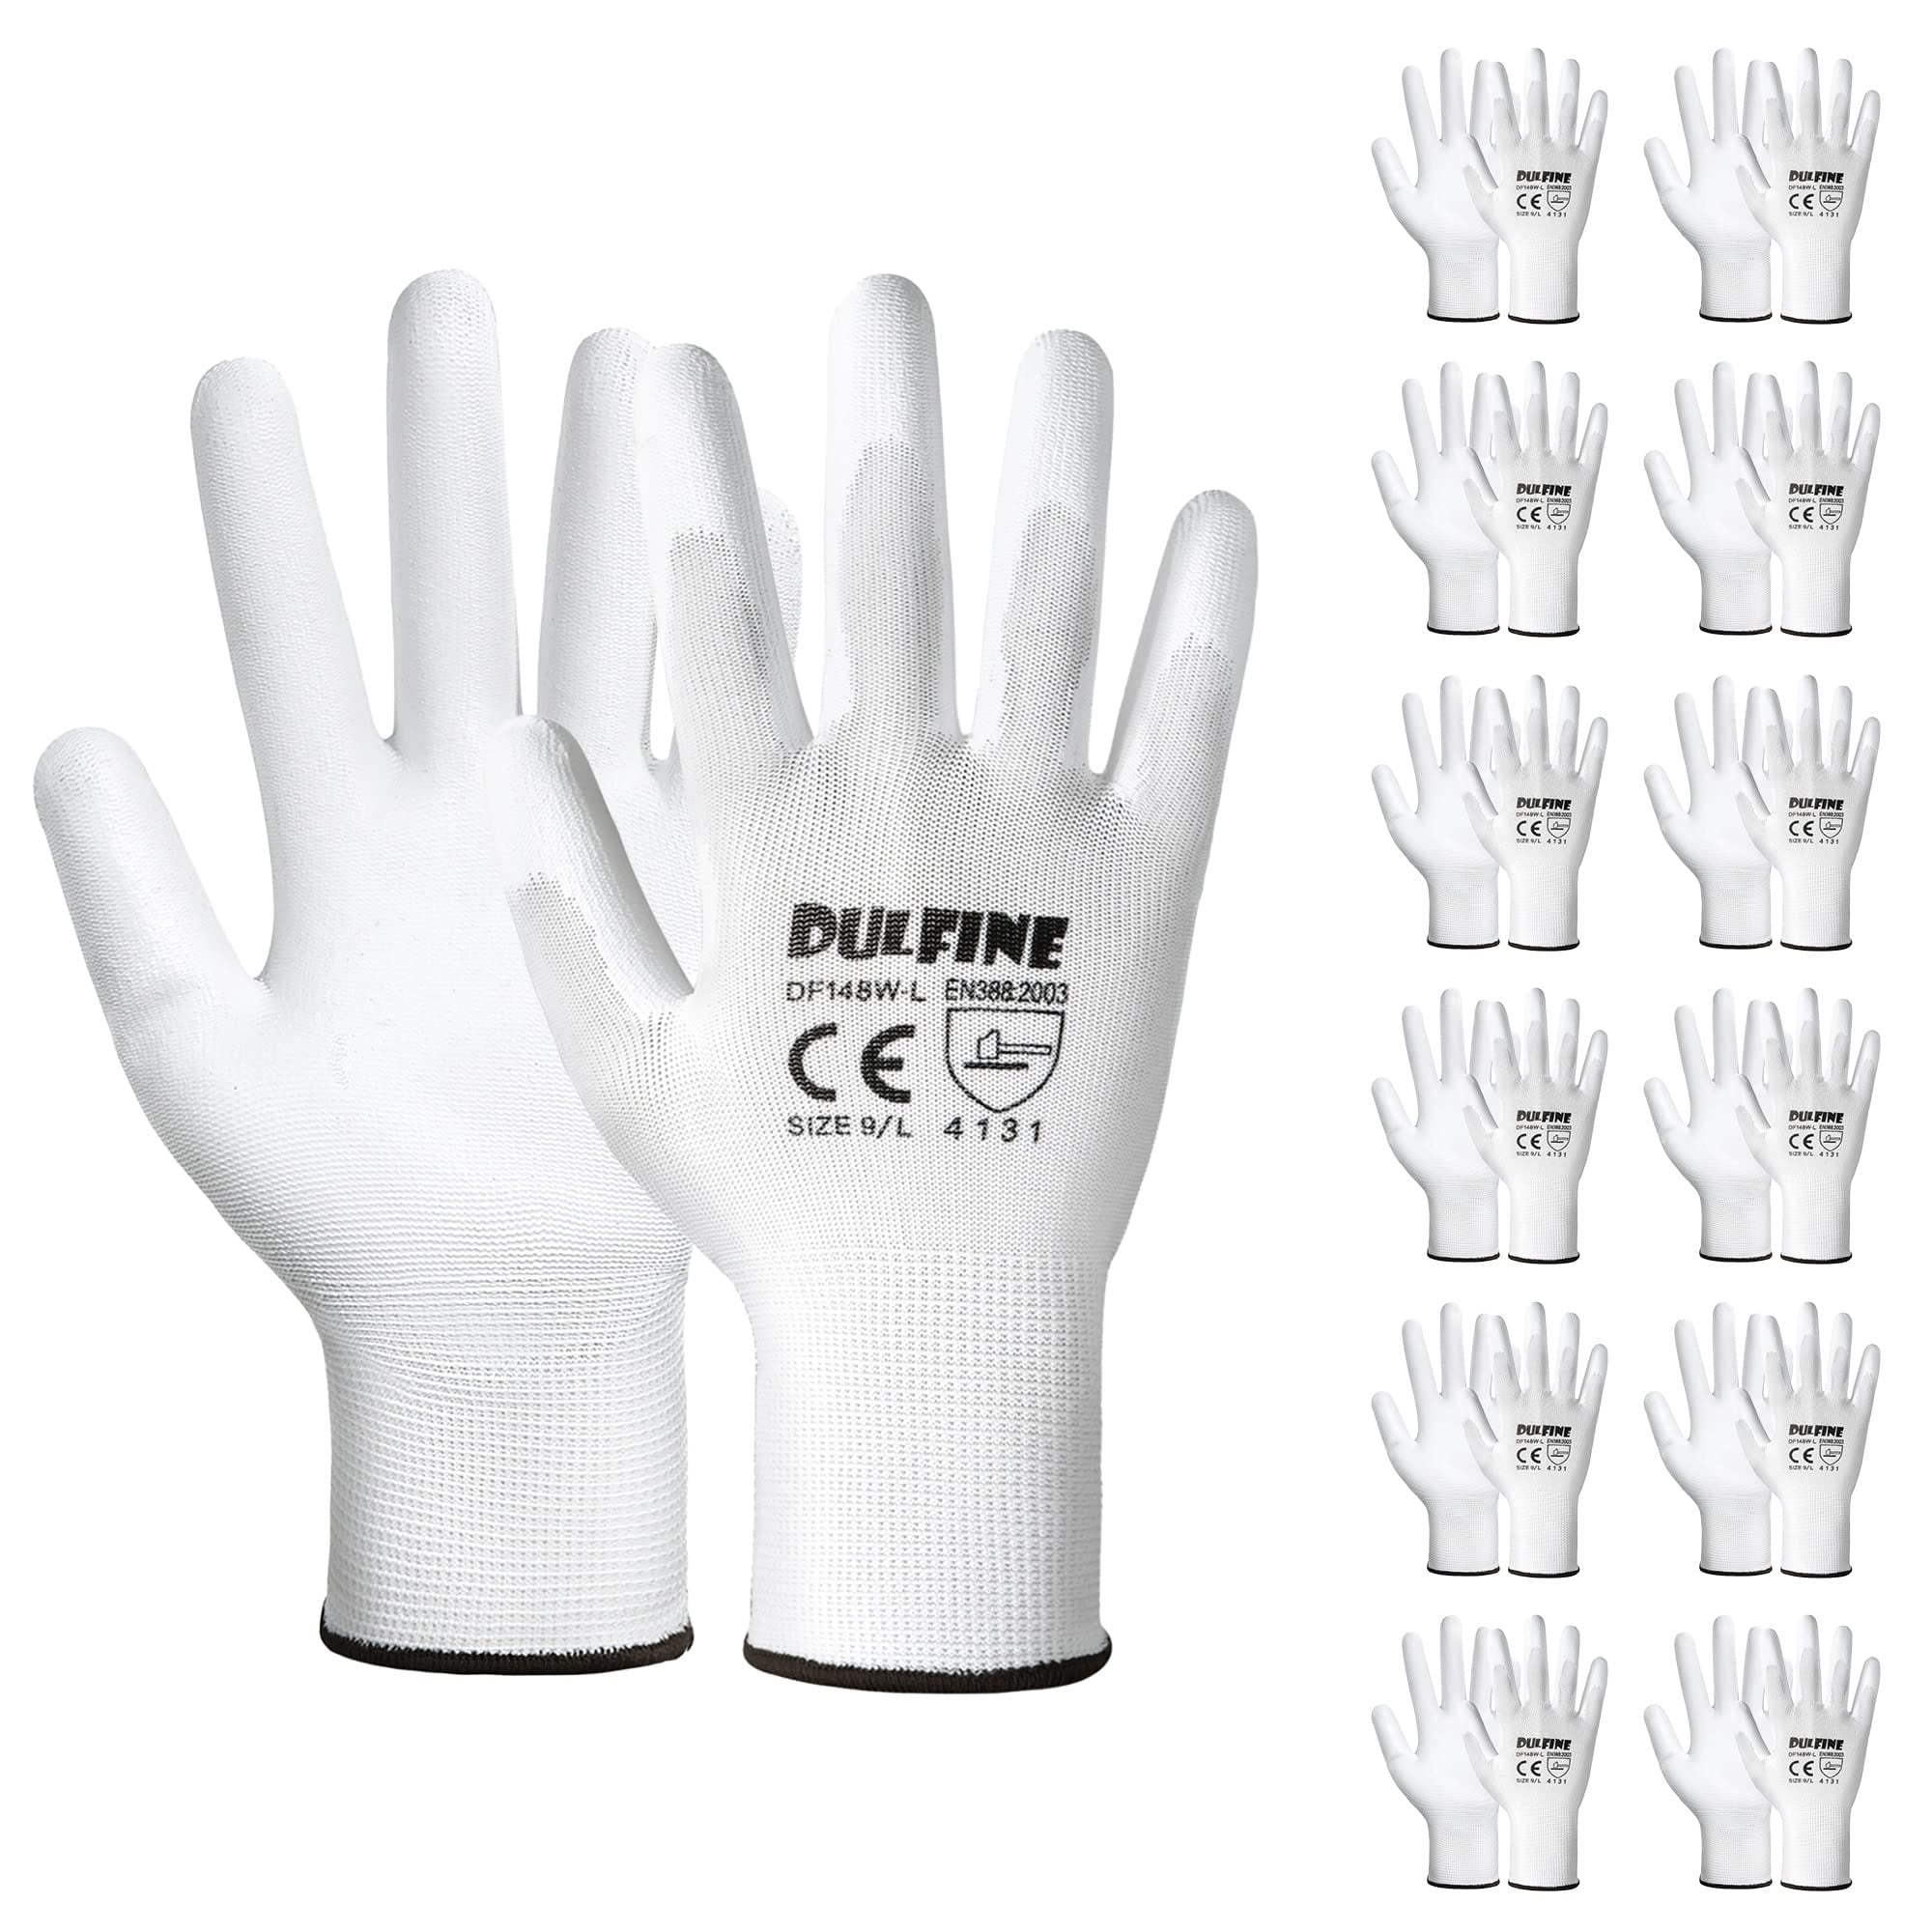 DULFINE Ultra-Thin PU Coated Work Gloves-12 Pairs,Excellent Grip,Nylon  Shell Black Polyurethane Coated Safety Work Gloves, Knit Wrist Cuff,Ideal  for Light Duty Work. (Extra Large) X-Large Black 